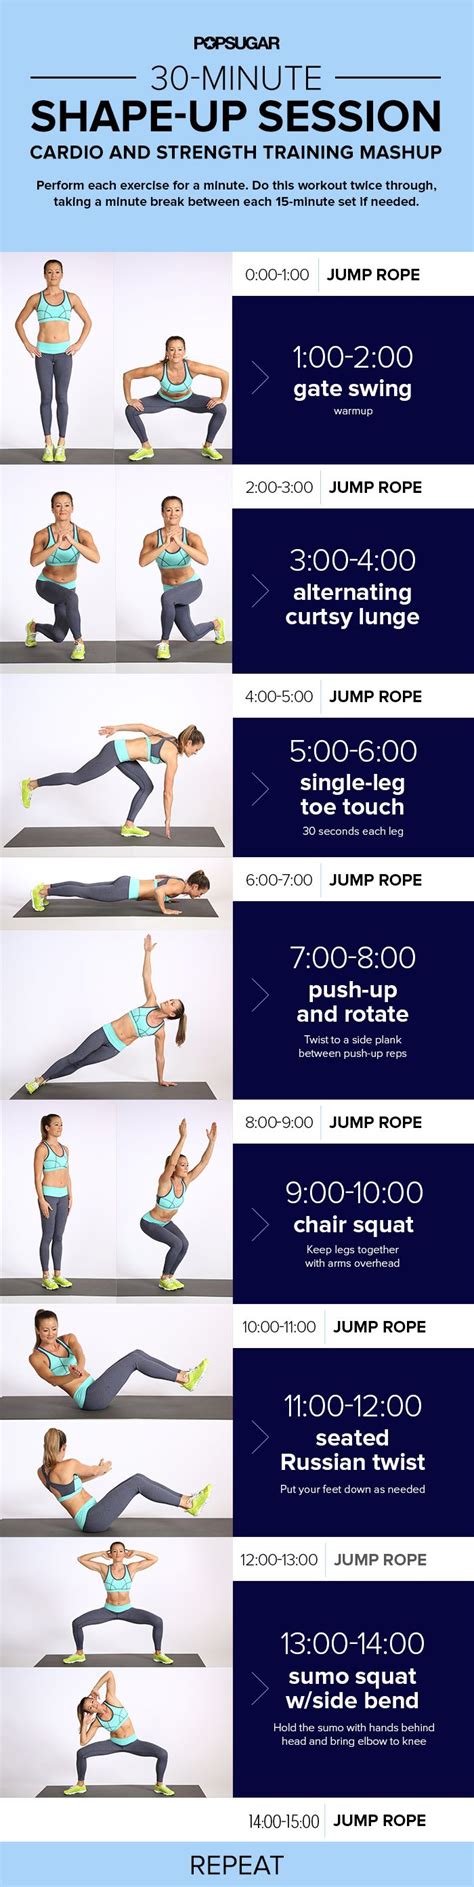 Hourglass Body Workouts That Will Give You An Amazing Fit Body